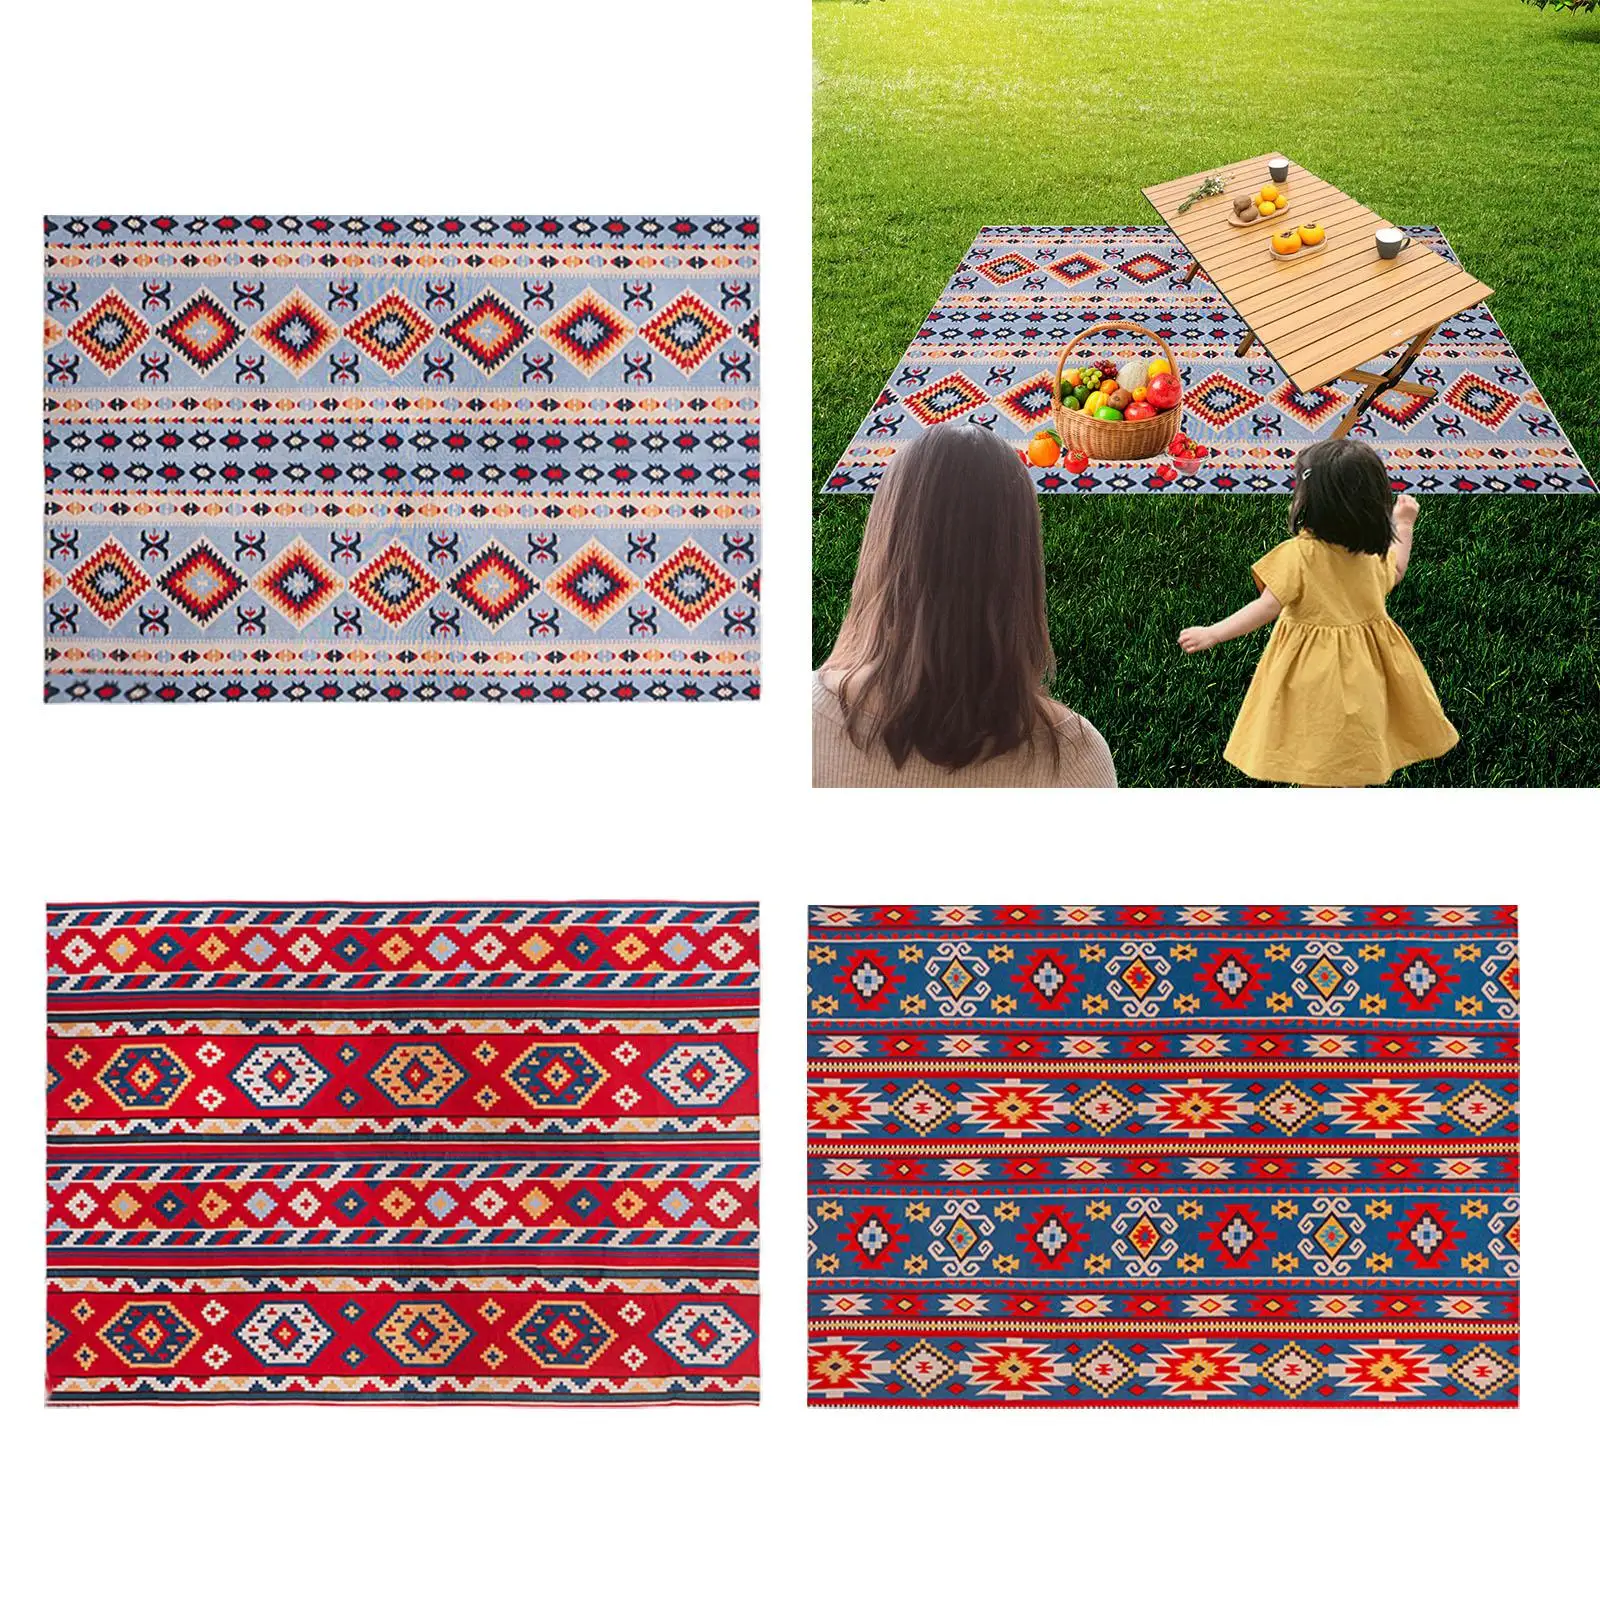 Large Picnic Outdoor Blanket Waterproof Outdoor Picnic Mat Blanket Mat for Hiking Garden Music Festival Sporting Events Lawn